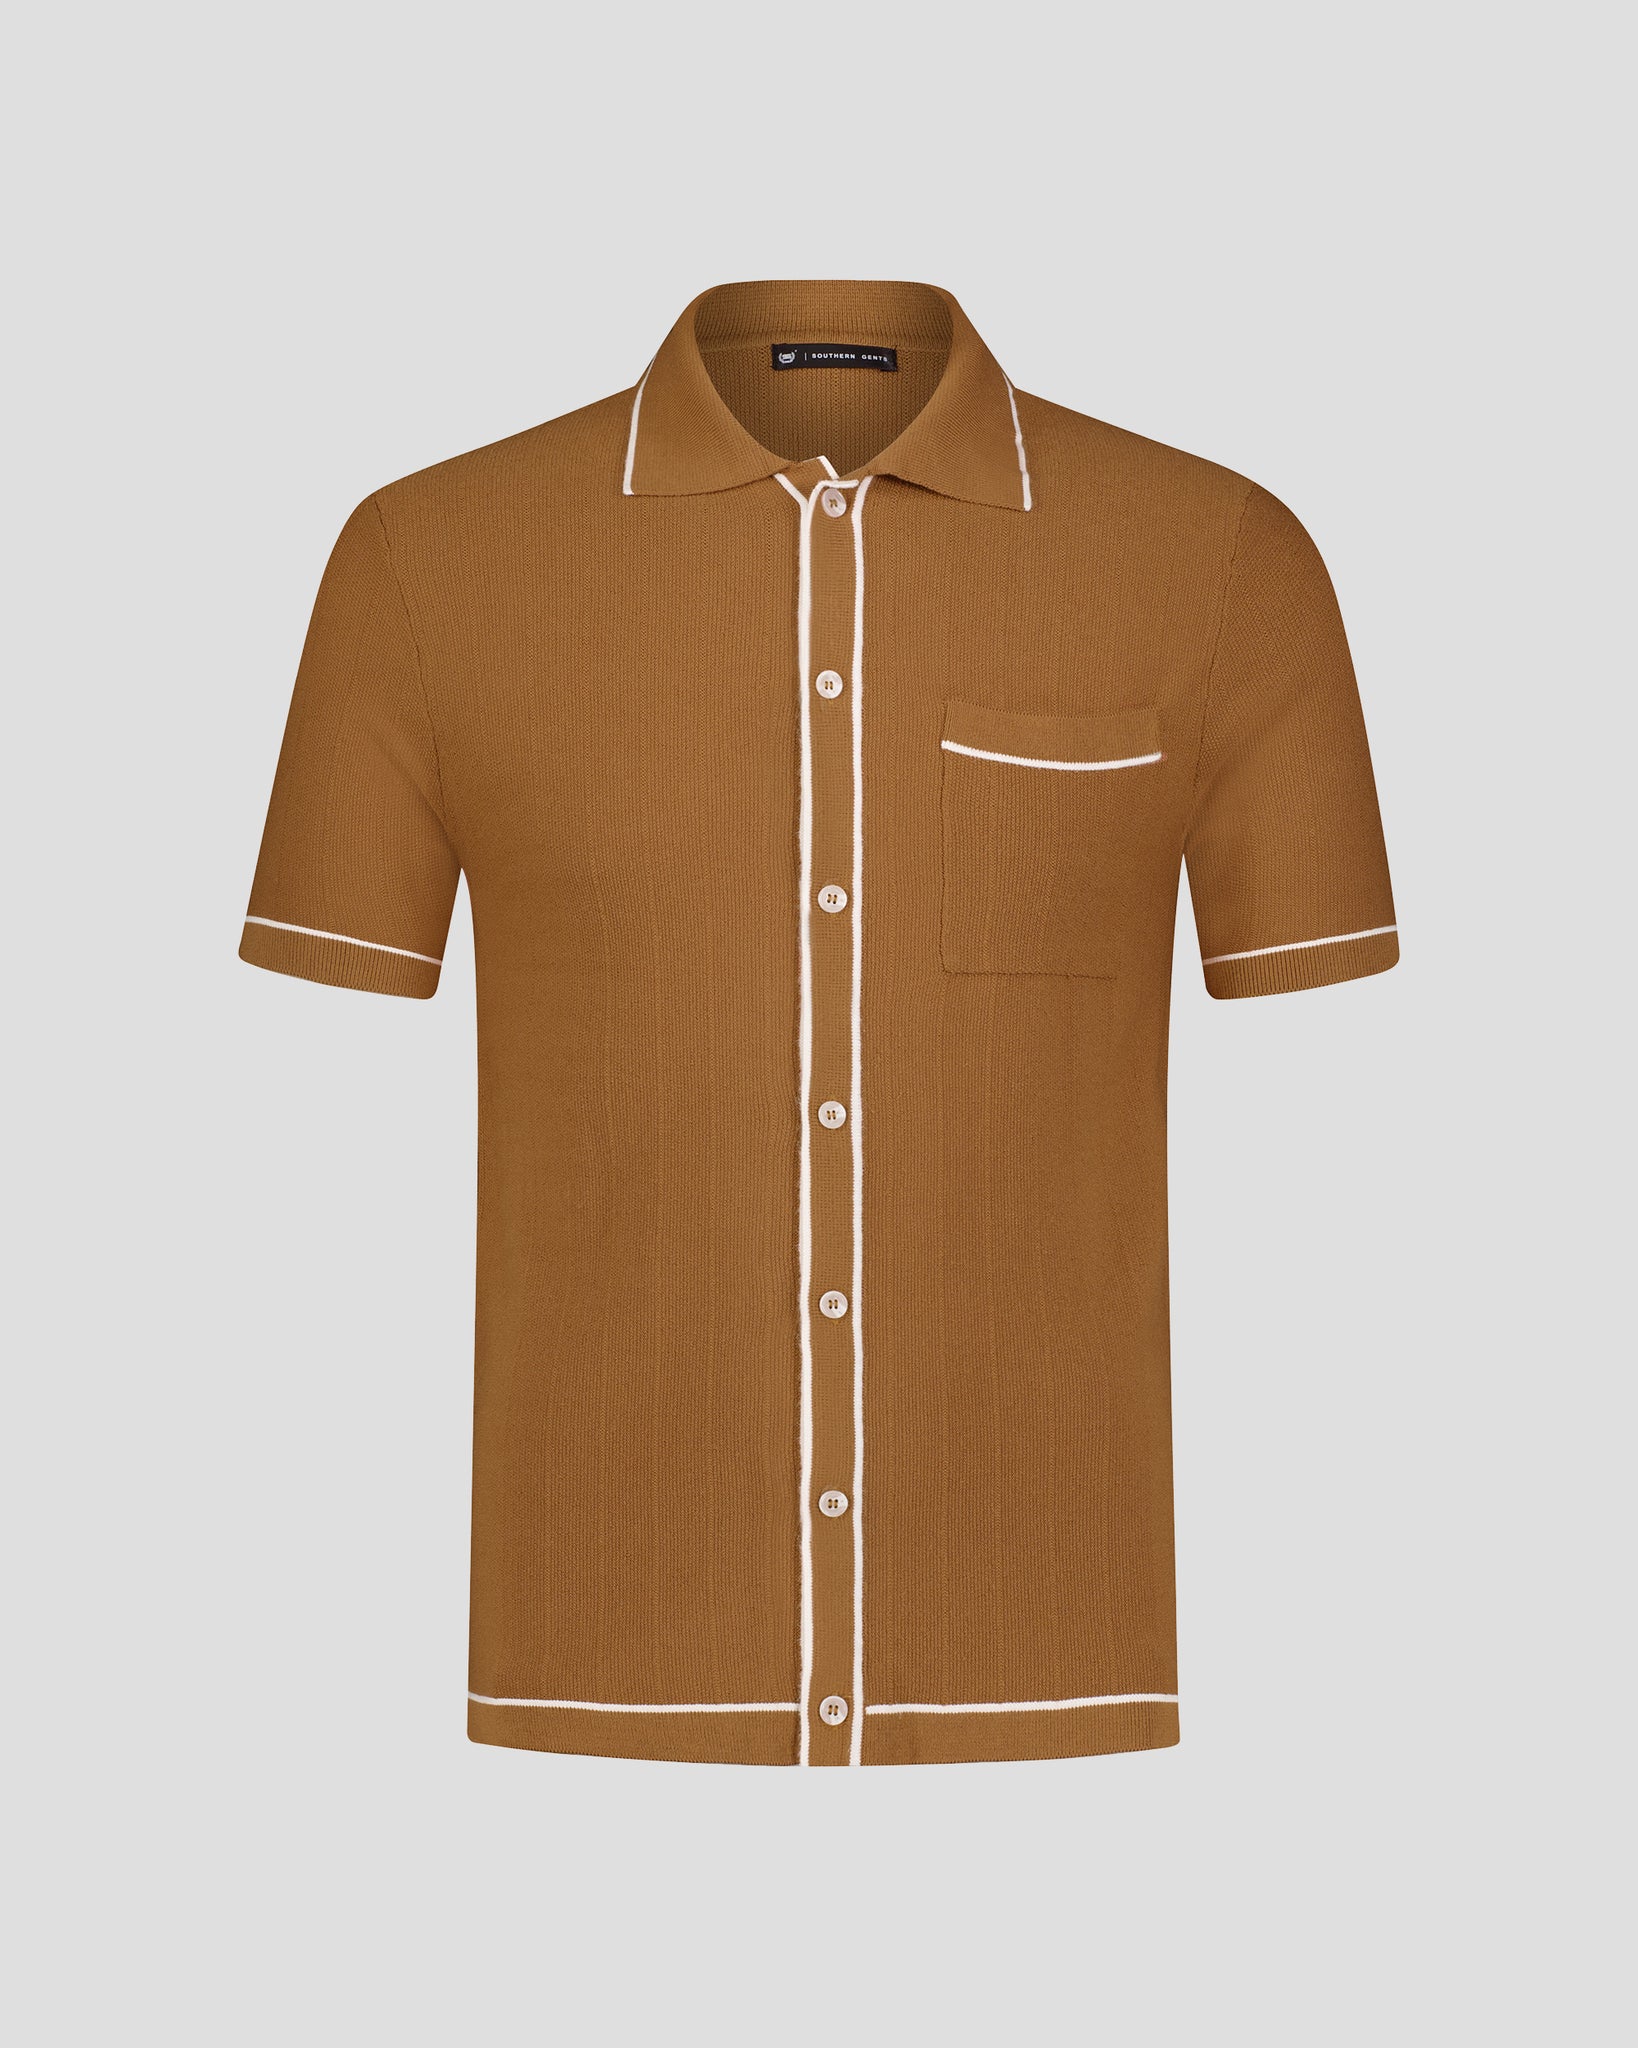 Southern Gents Knit Polo - Tipped Brown